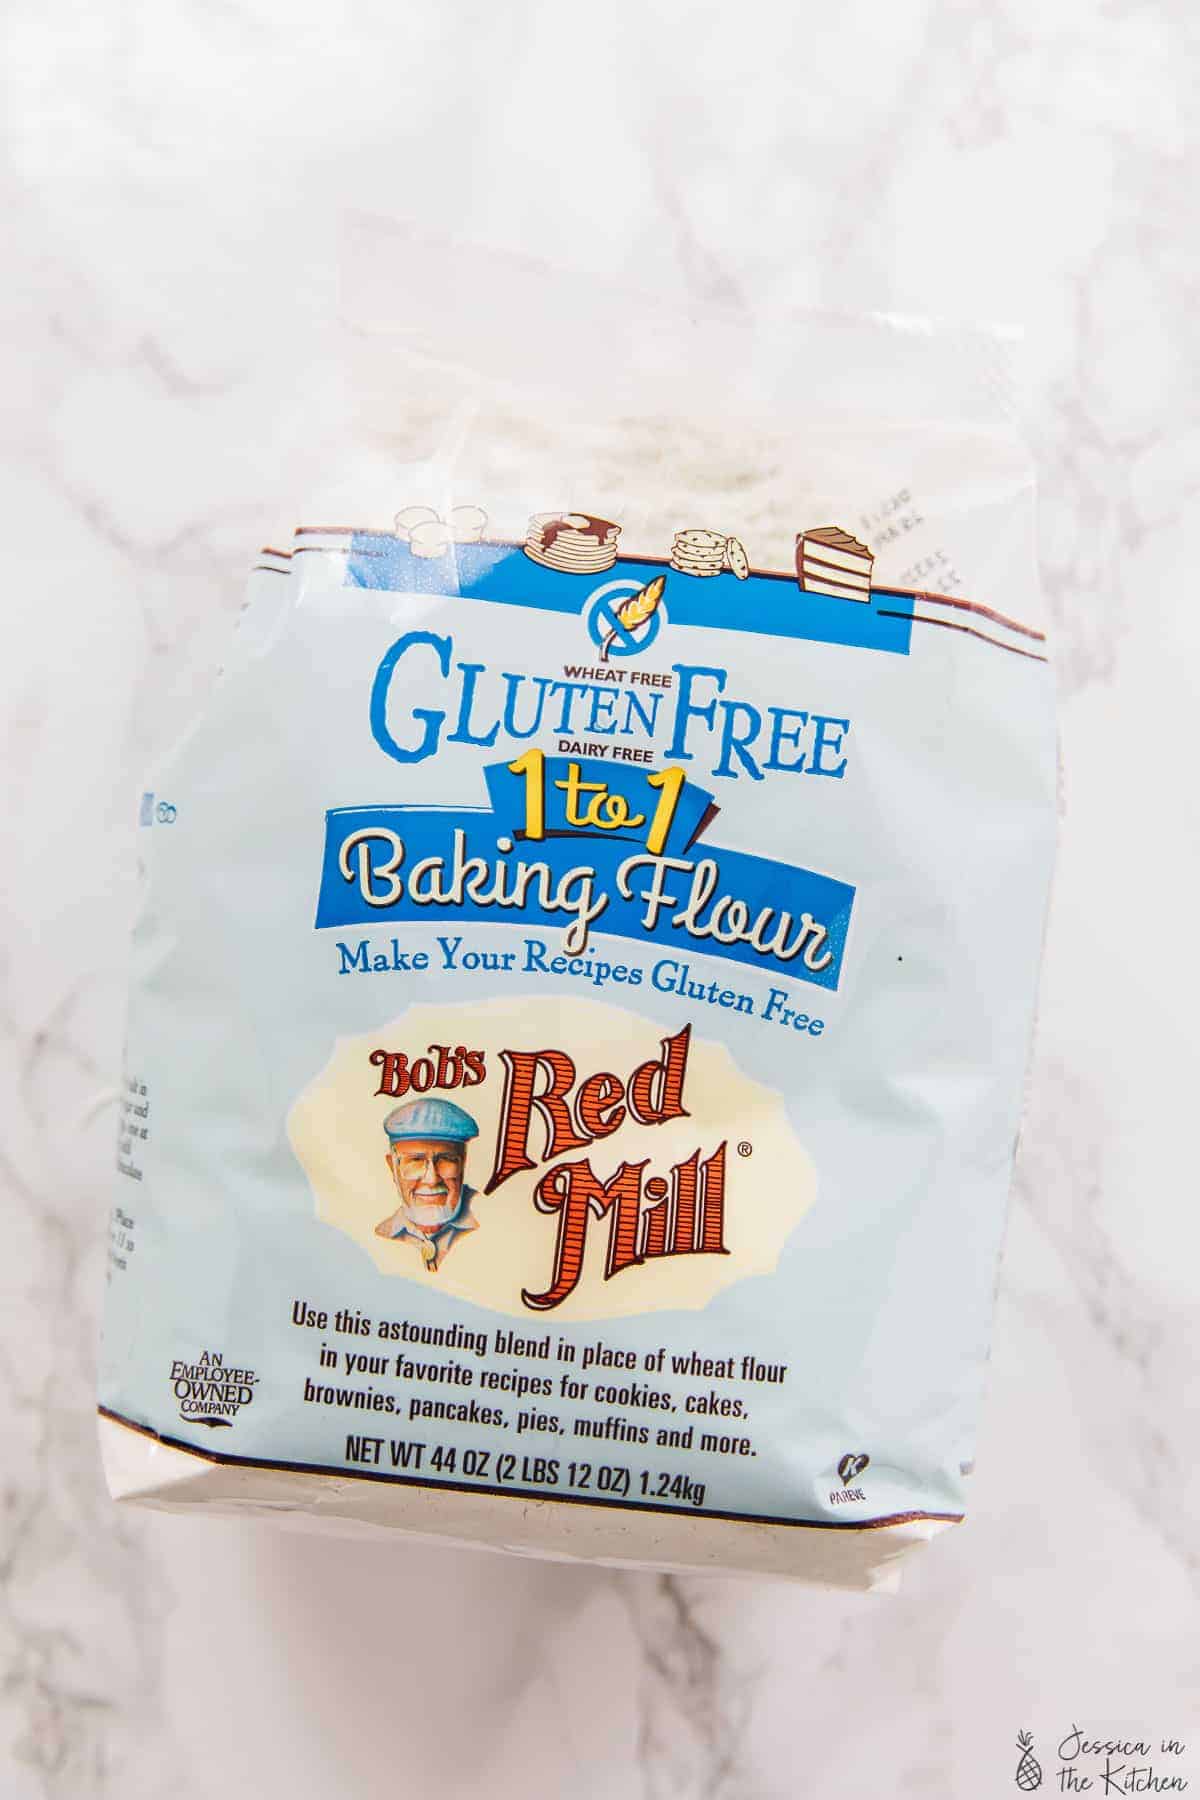 A pack of gluten free baking flour on a white backdrop. 